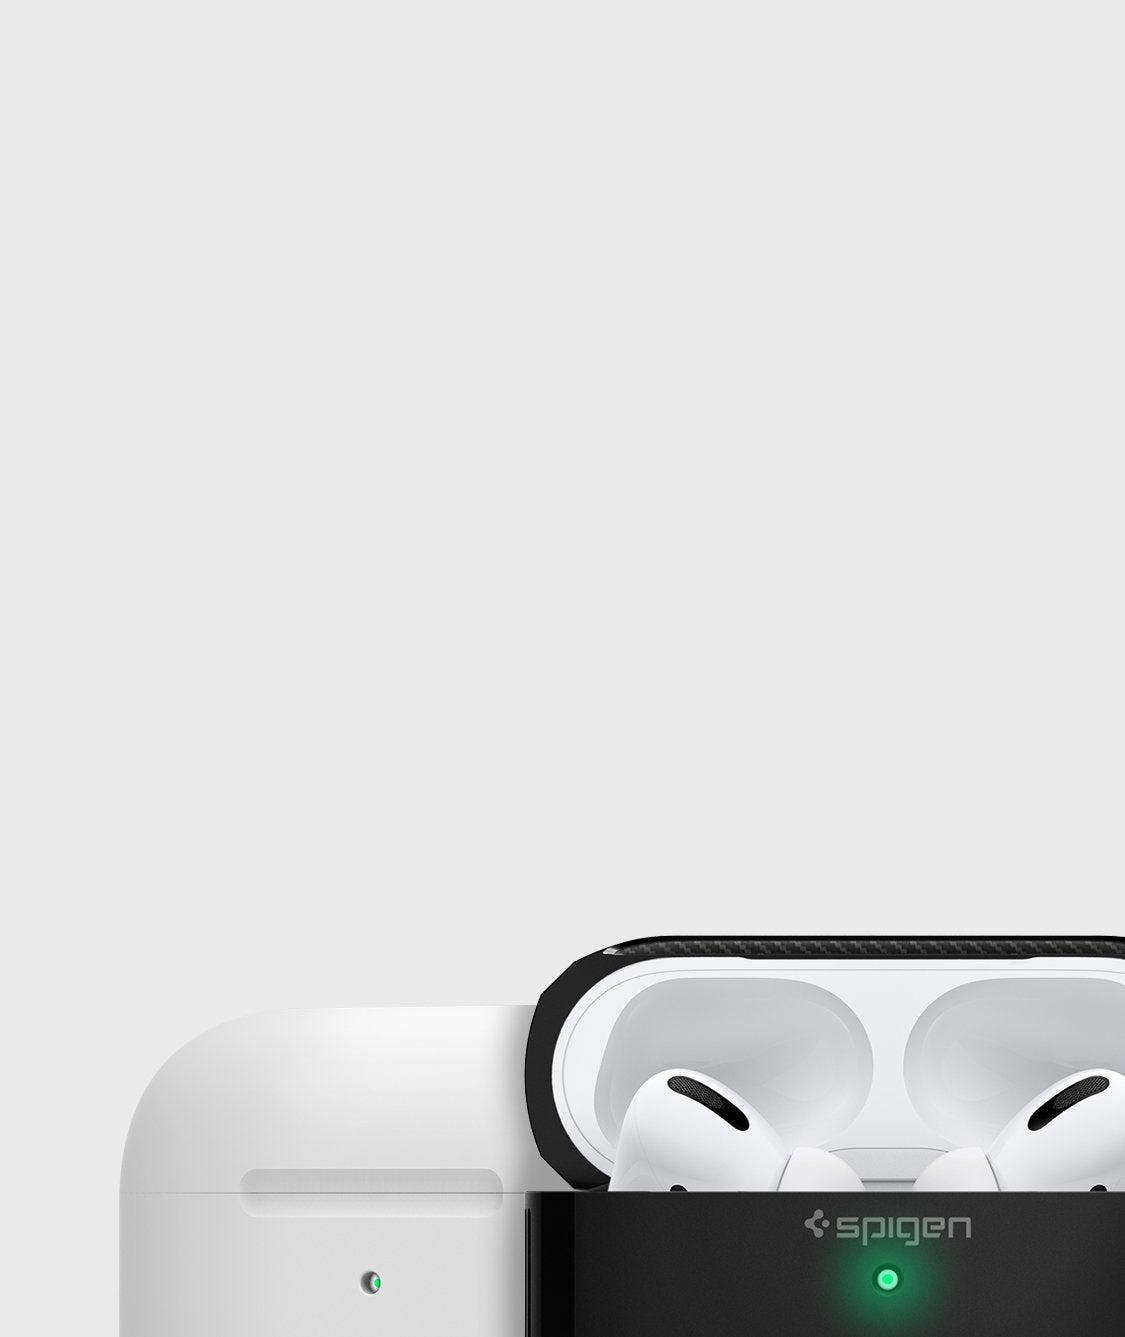 Spigen Cases And Accessory for Apple AirPods Pro